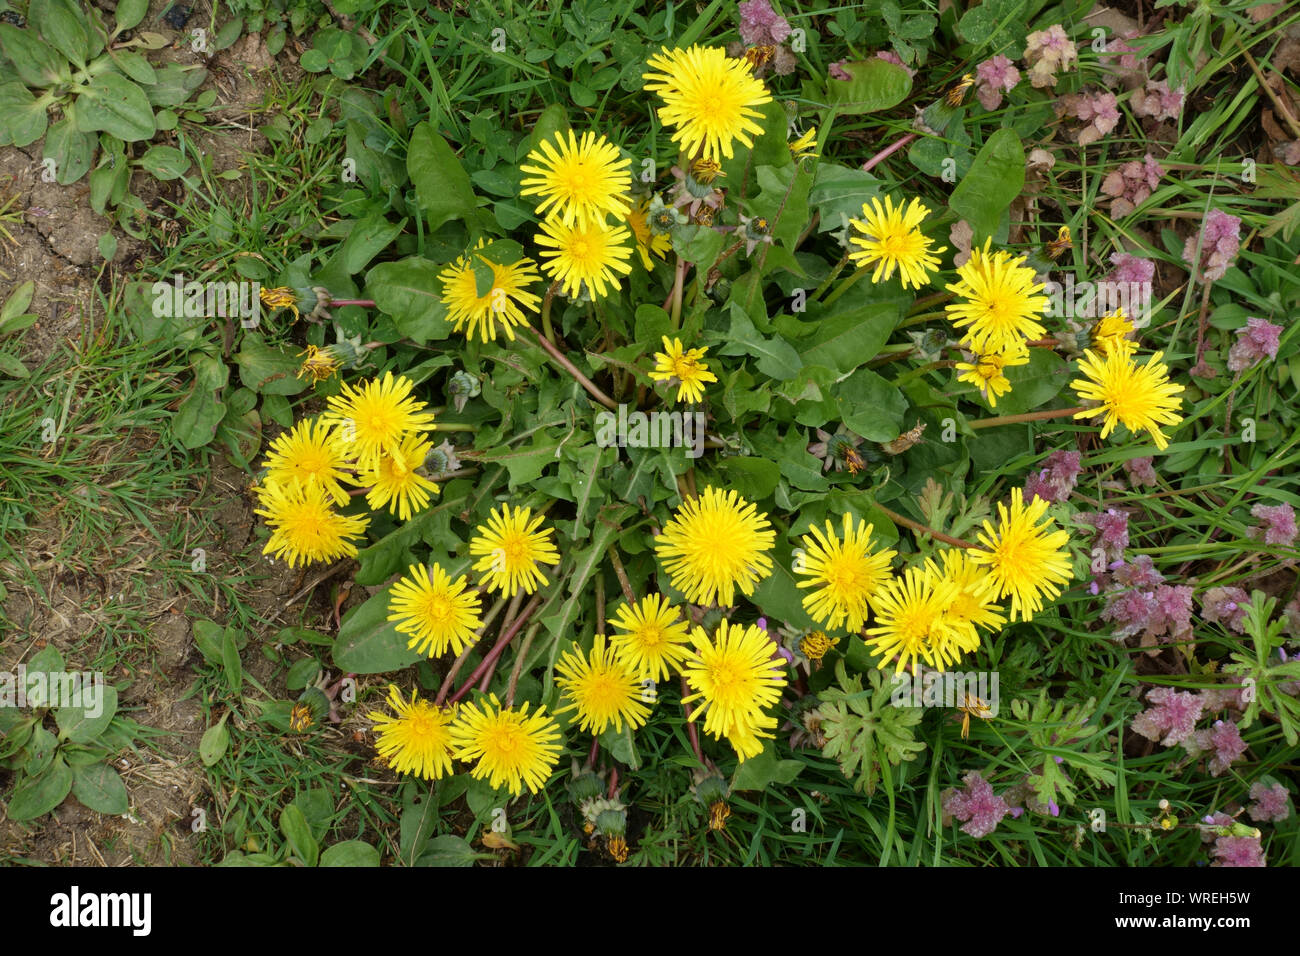 Dandelion (Taraxacum officinale) plant rosette with a large number of yellow composite flowers, Berkshire, May Stock Photo